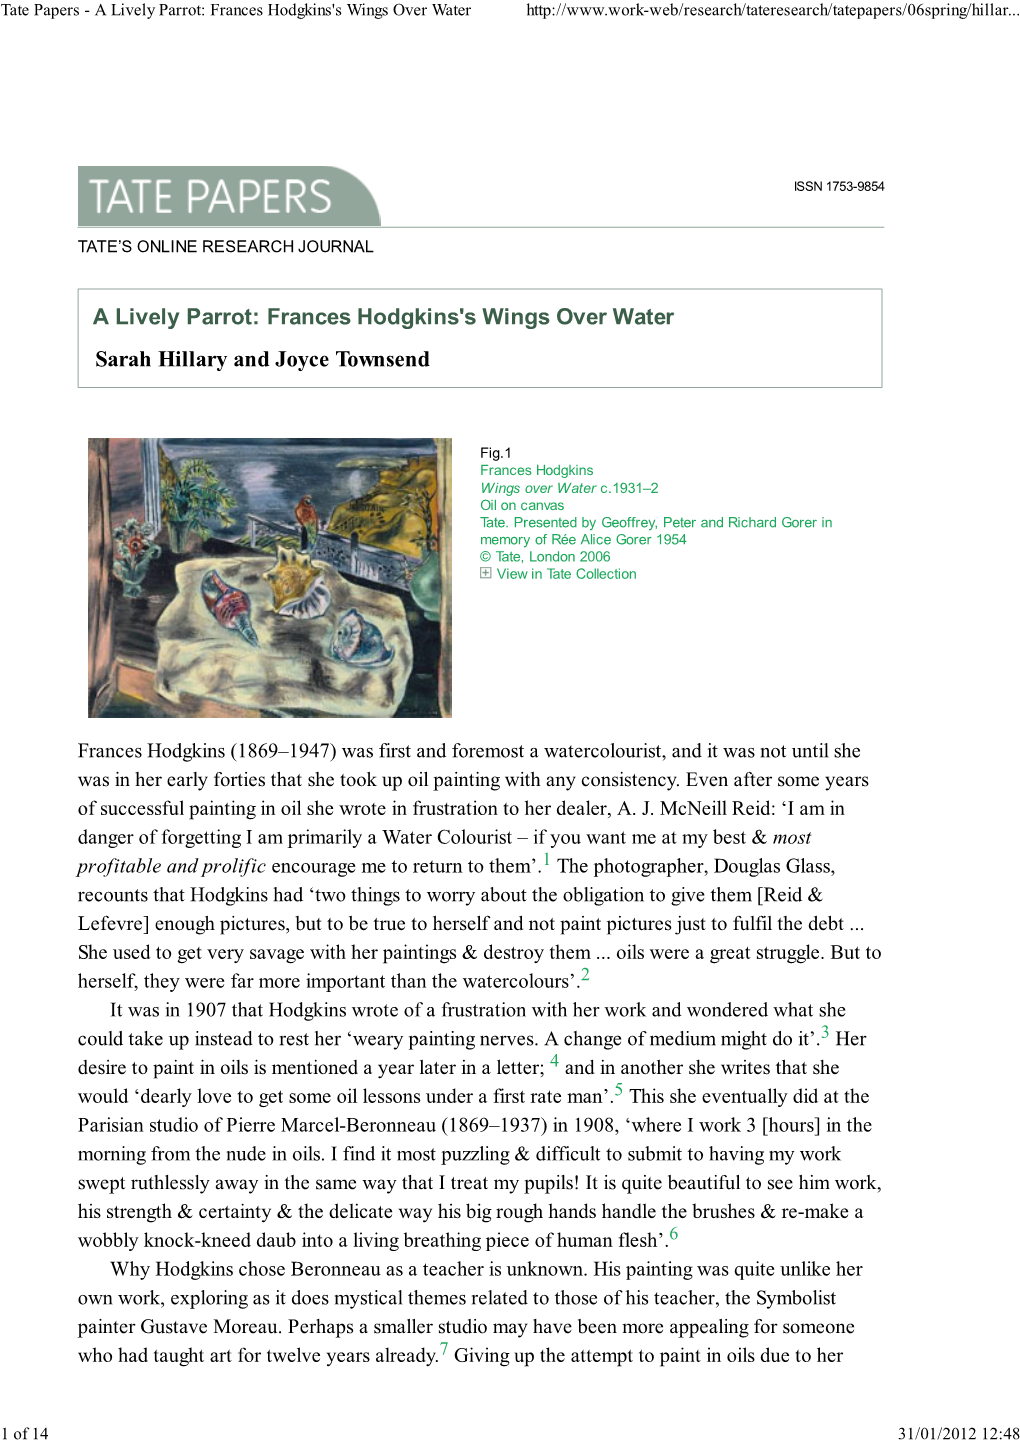 Tate Papers - a Lively Parrot: Frances Hodgkins's Wings Over Water